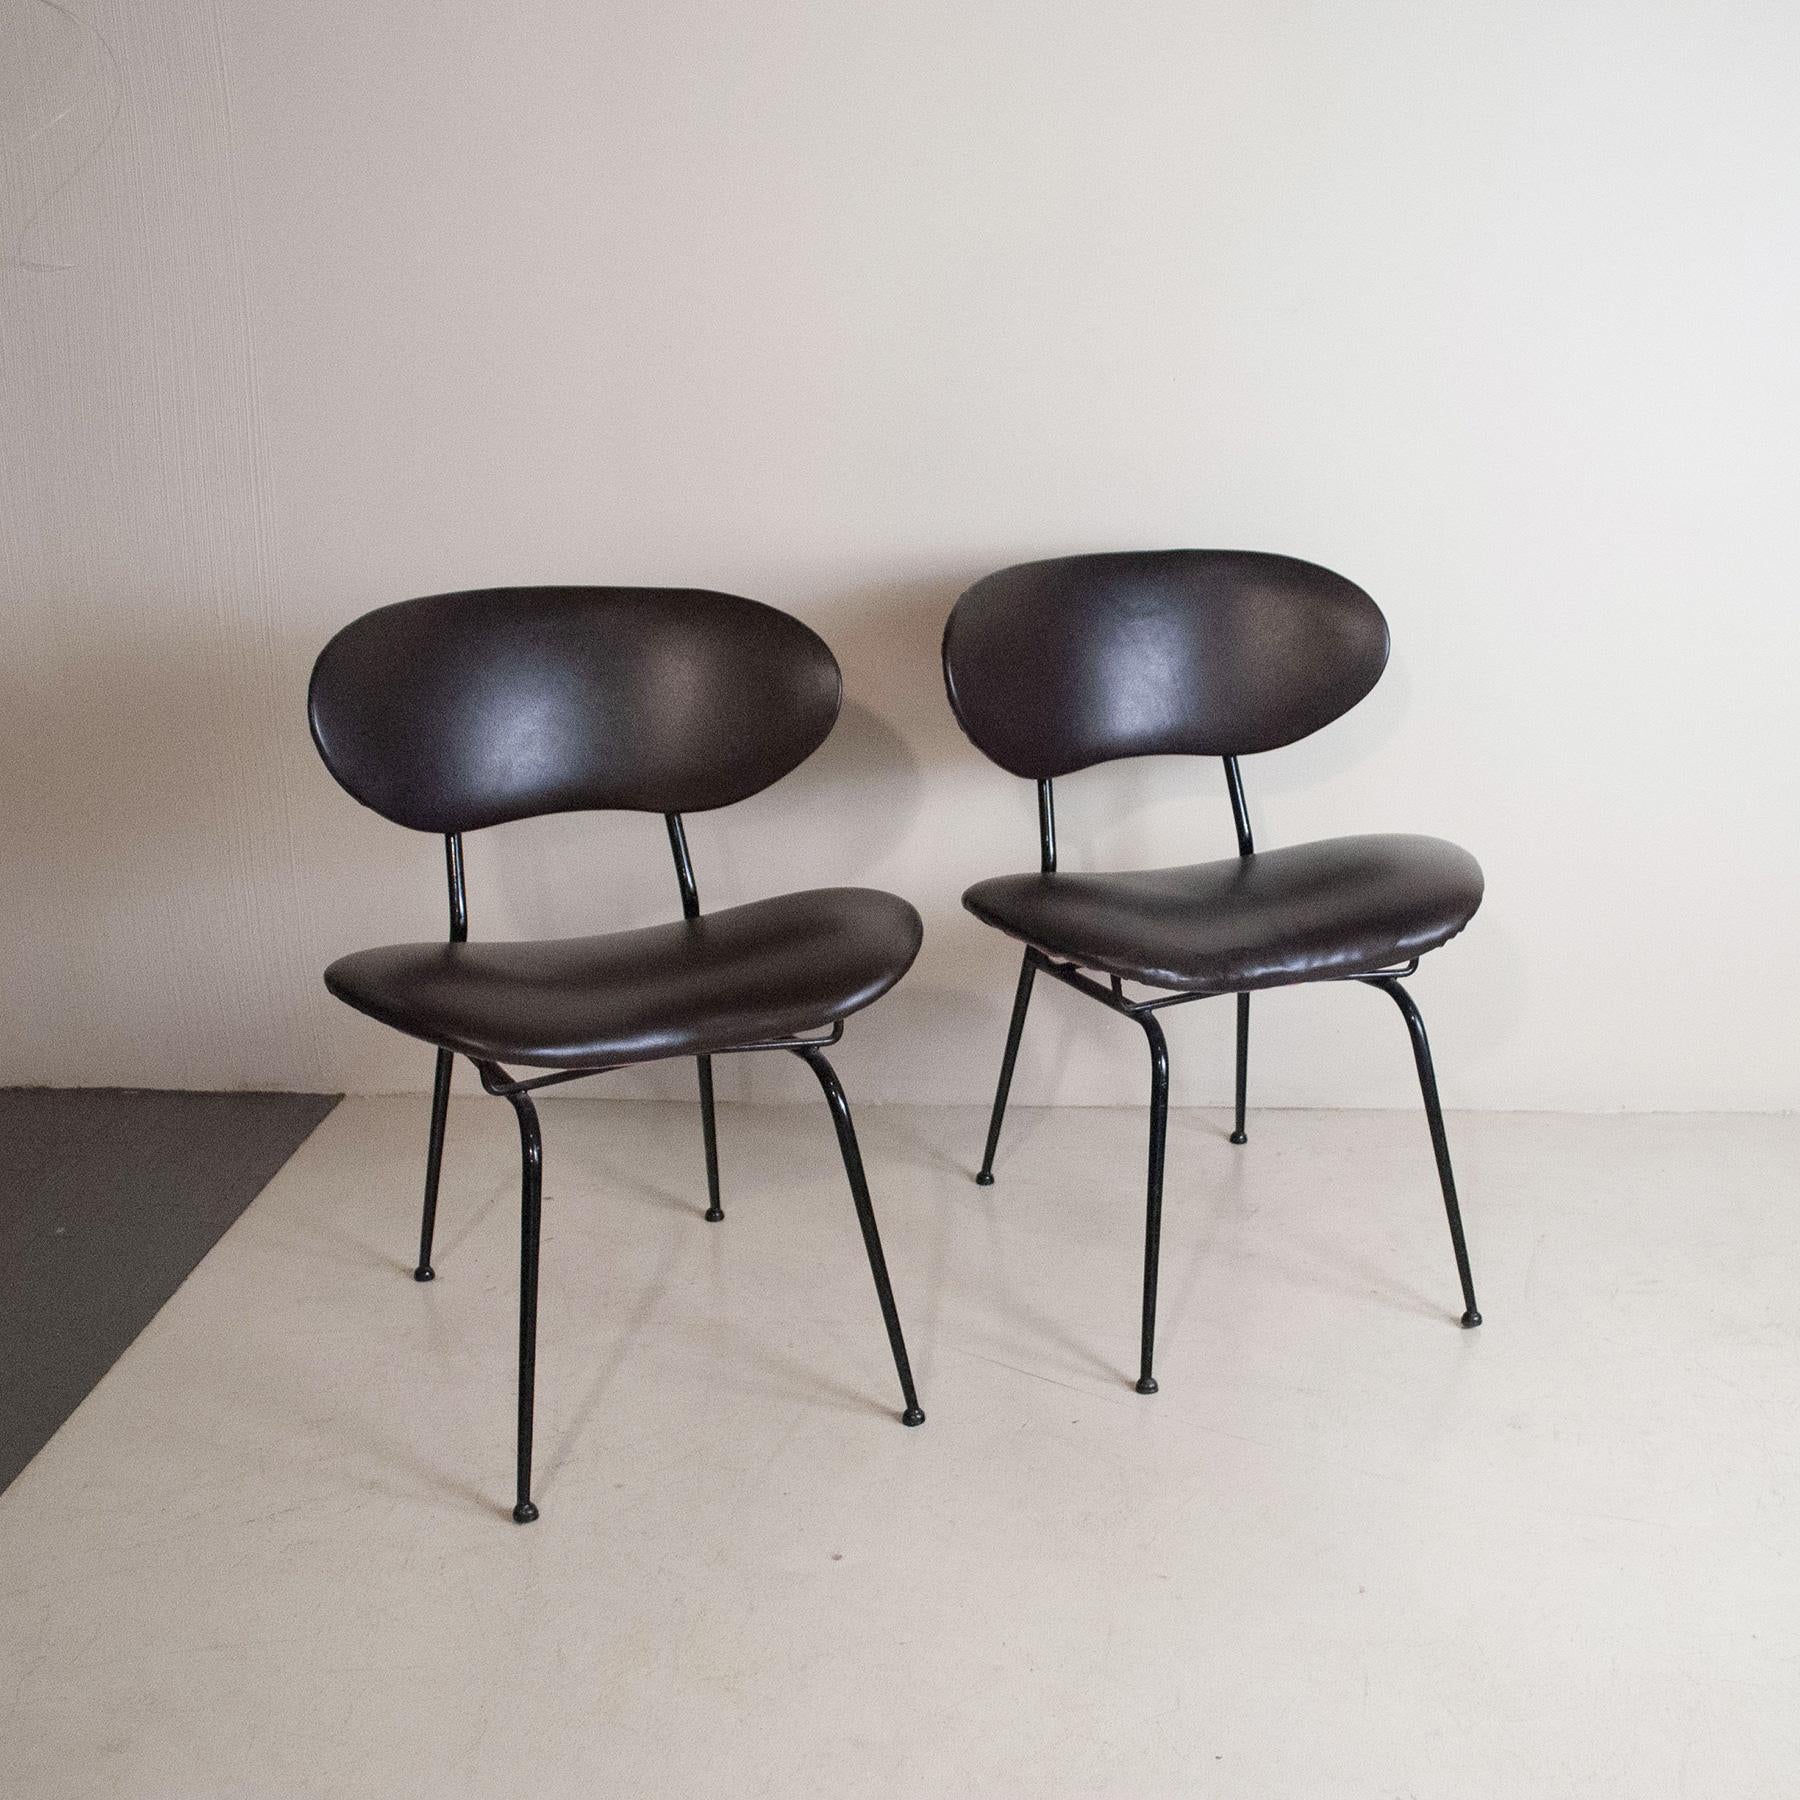 set of two chairs with black lacquered iron structure and leather seats in the BBPR Studio style